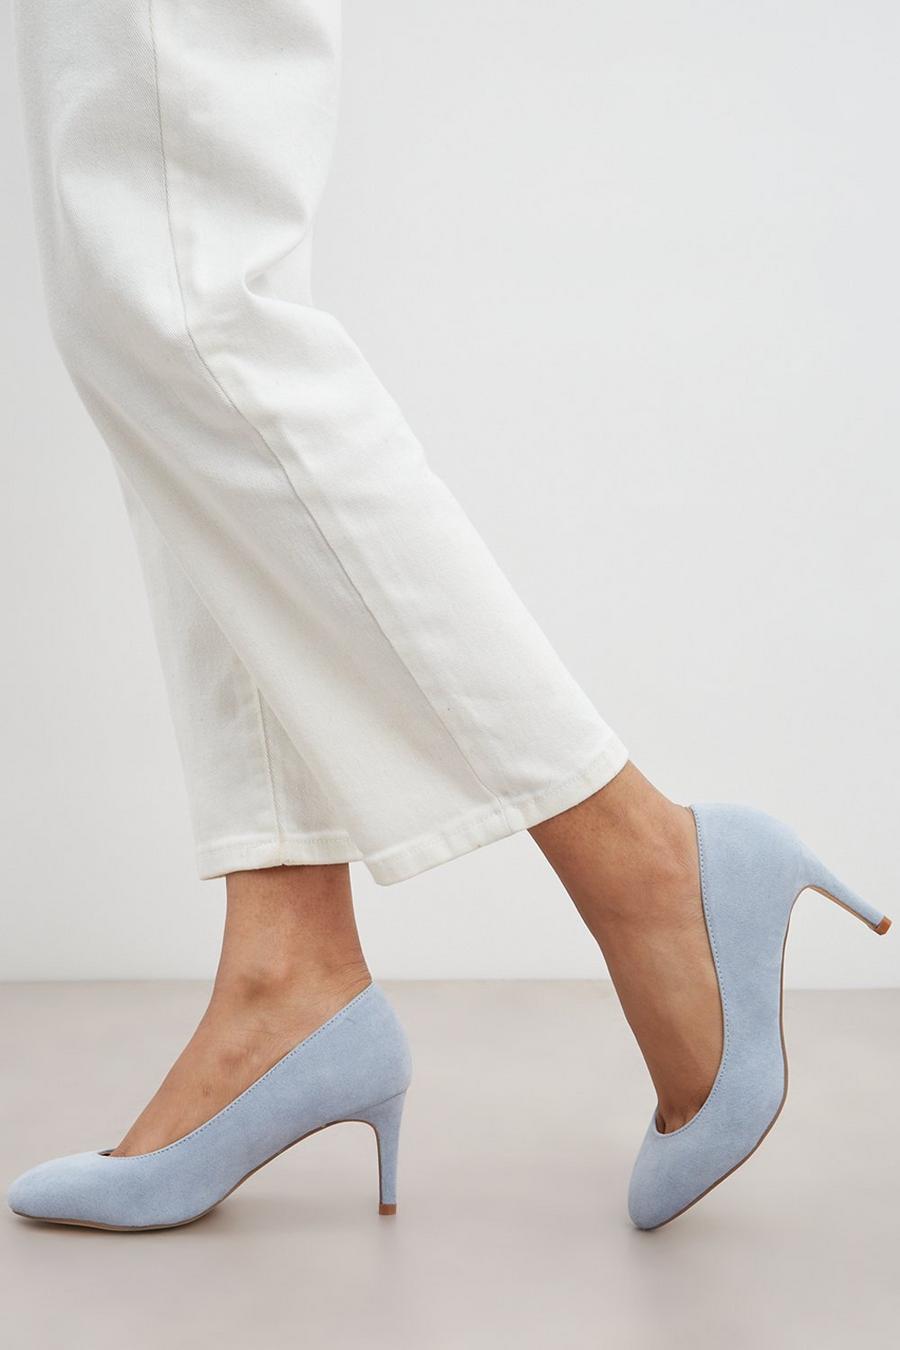 Good For The Sole: Angela Almond Toe Court Shoe